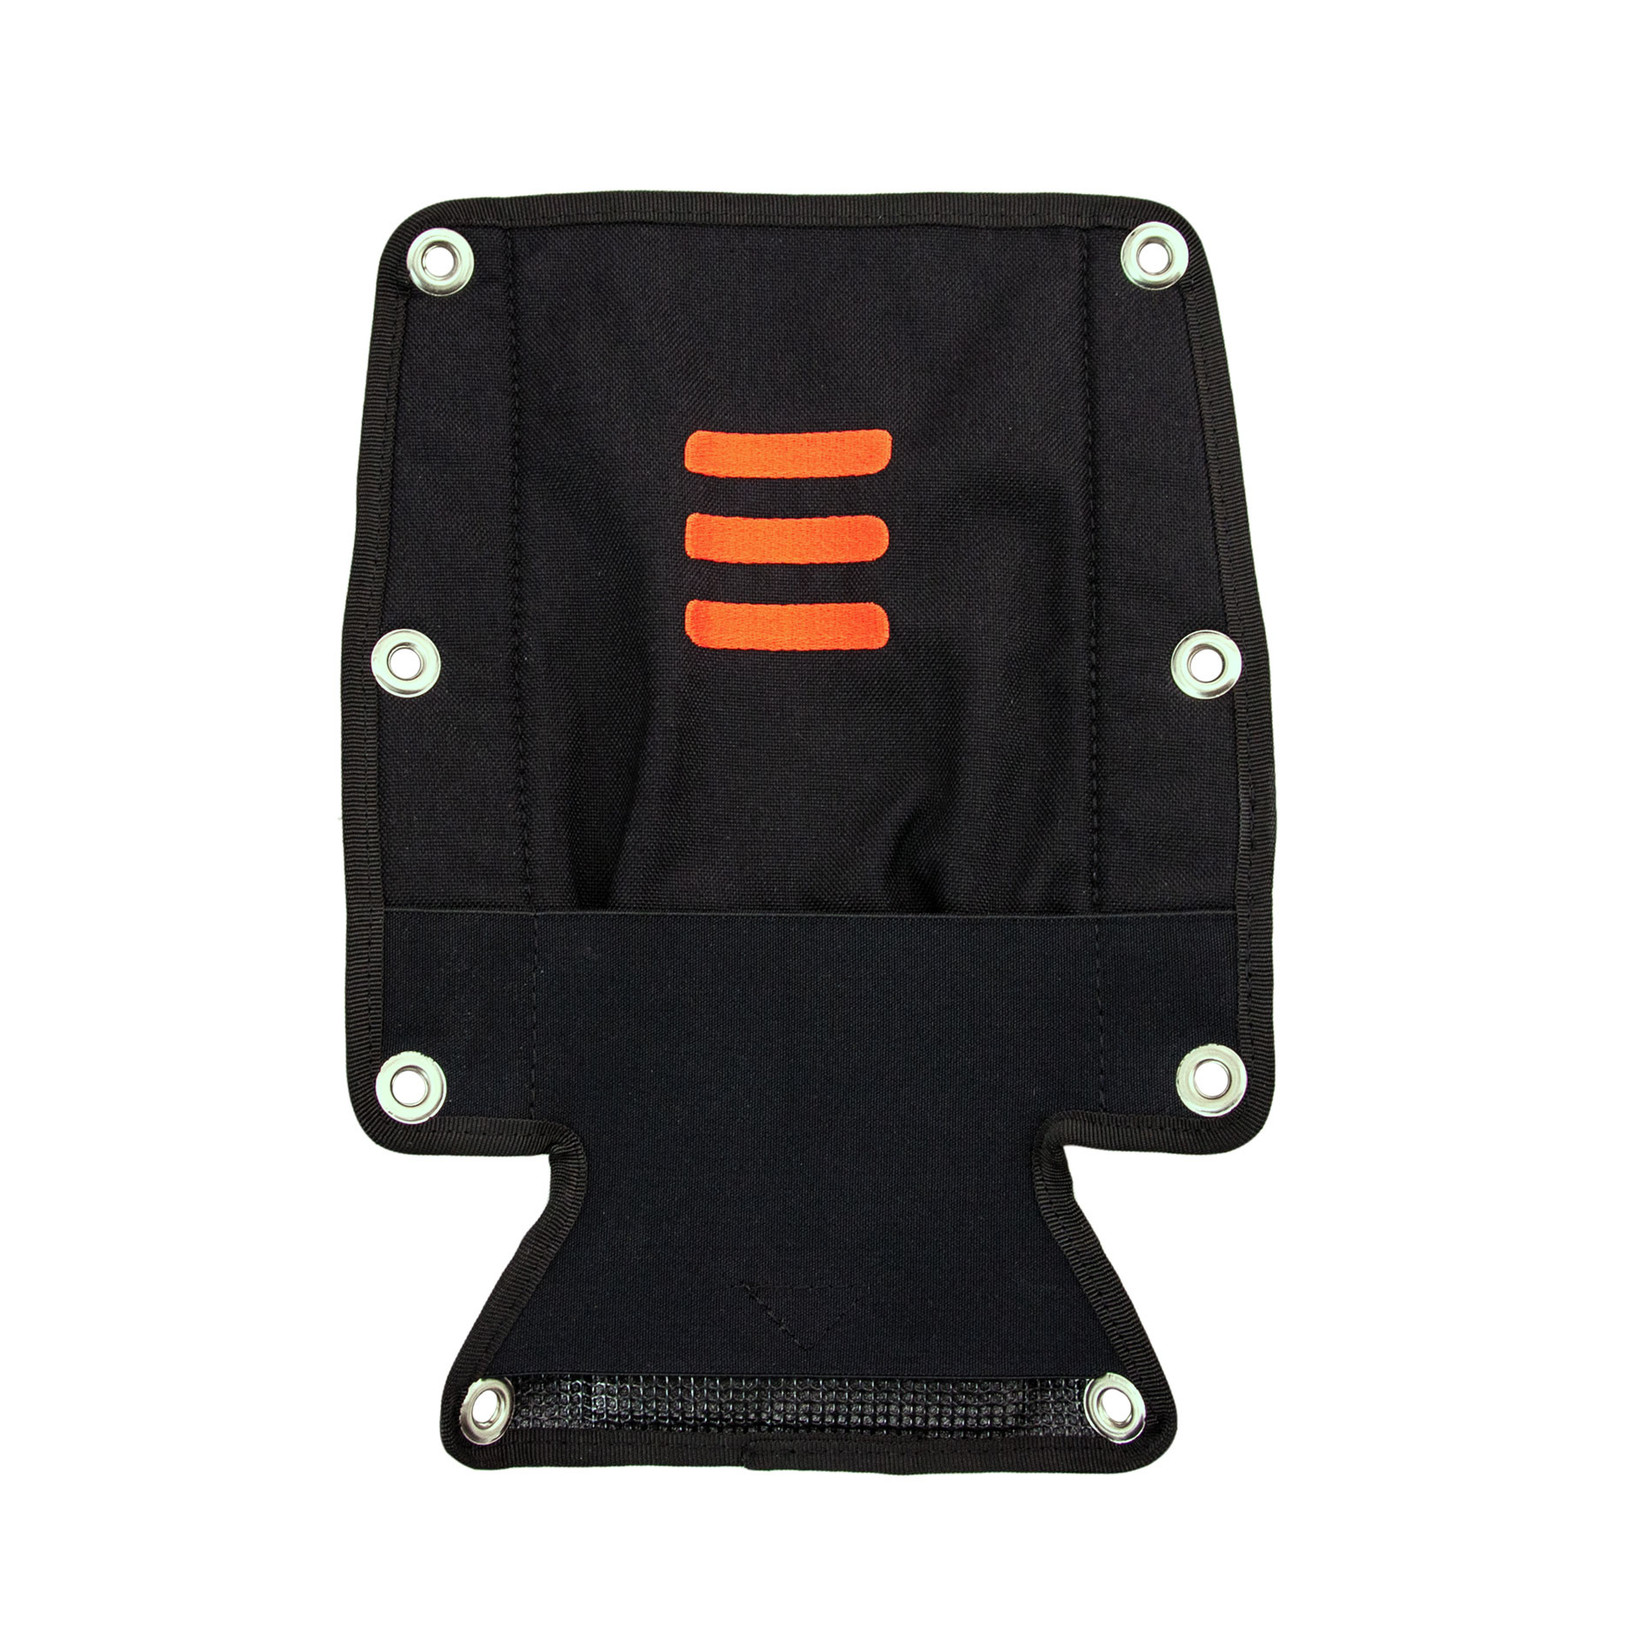 Tecline Backplate soft pad with buoy pocket - without bolts and nuts